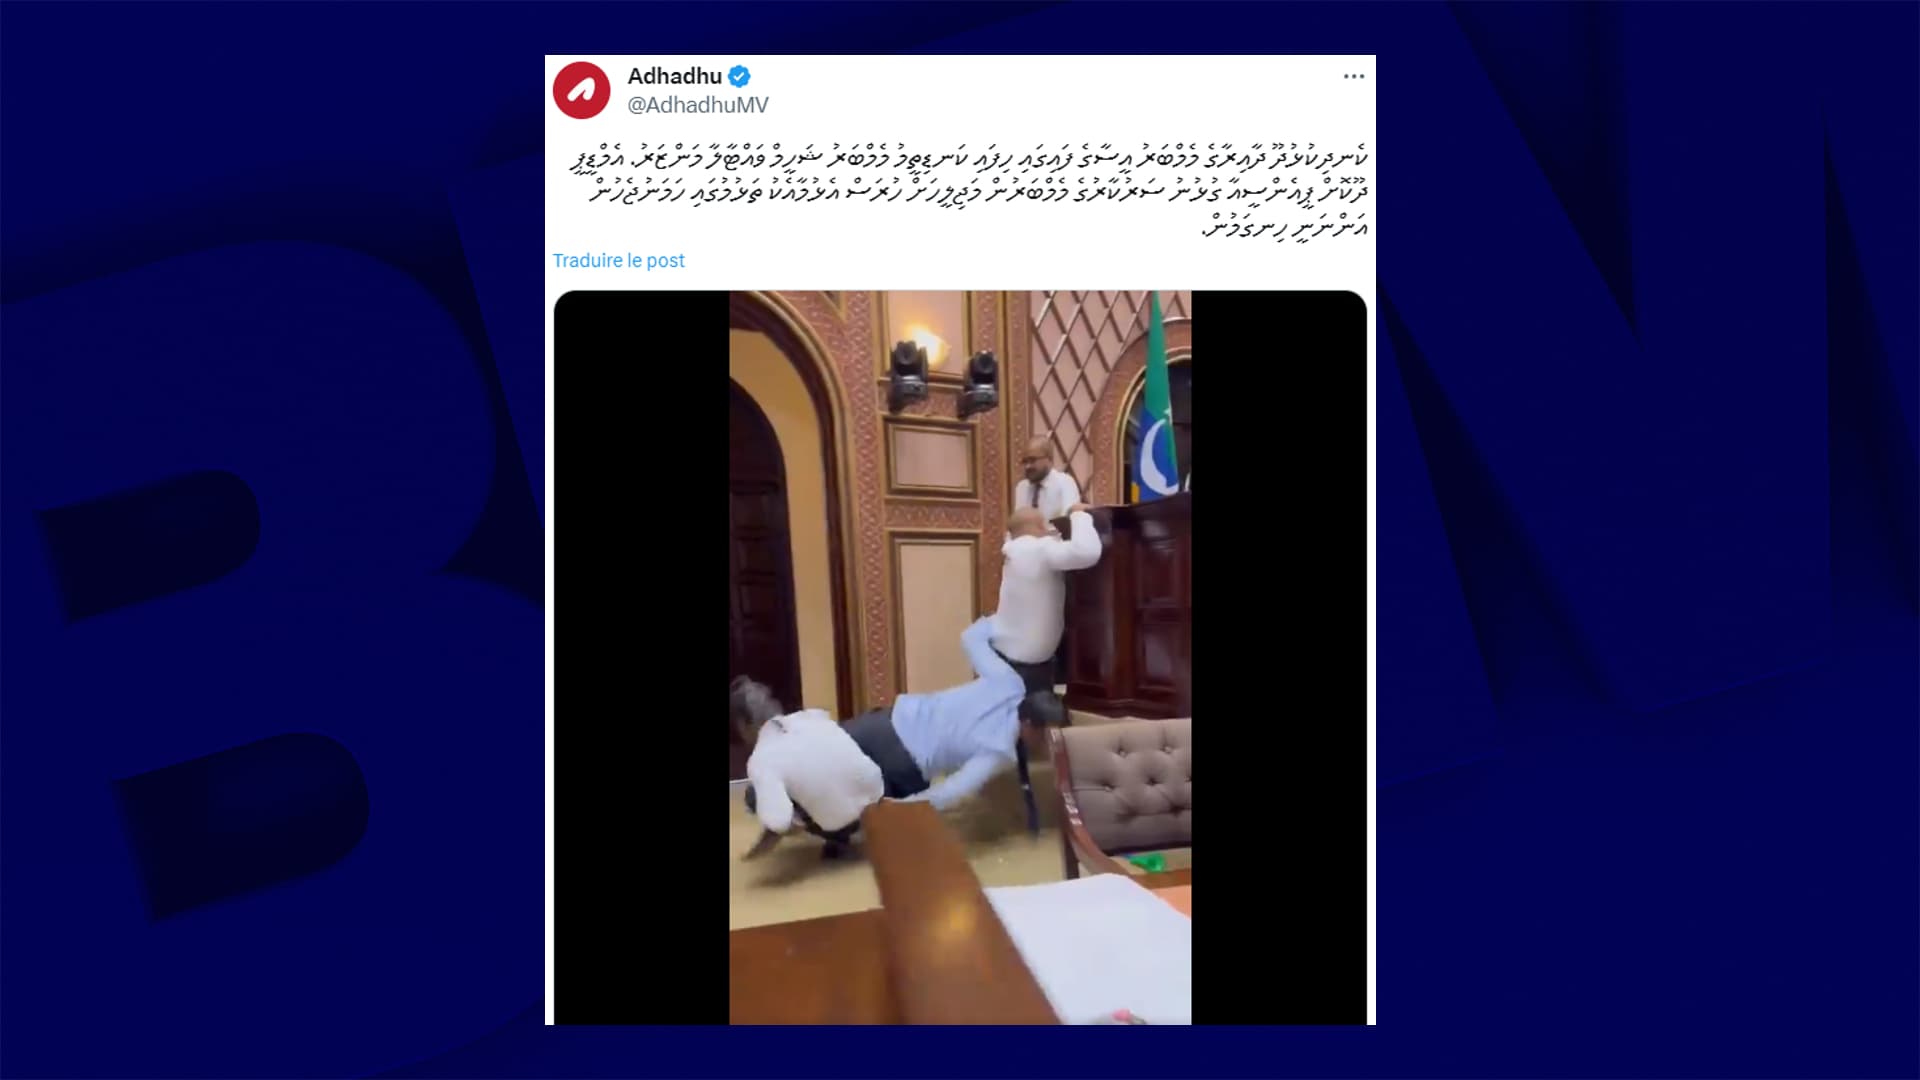 A fight broke out between representatives in Parliament